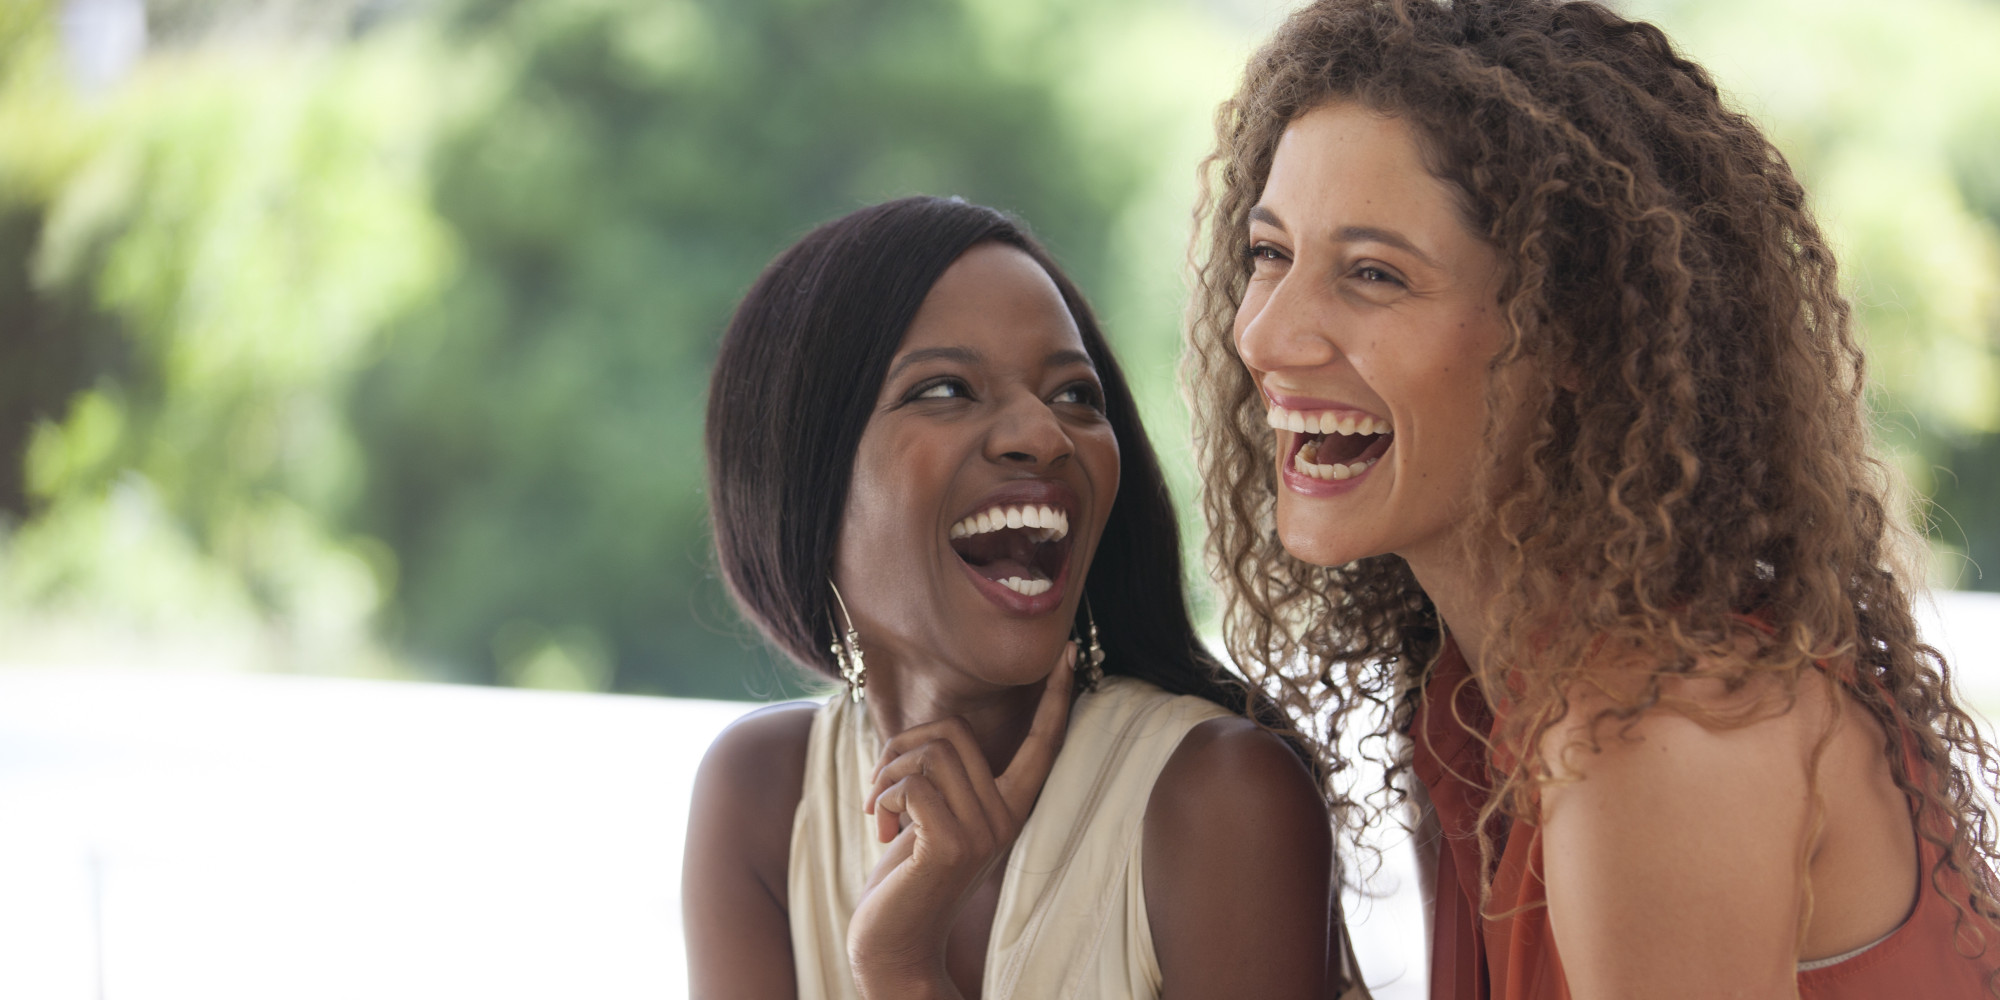 o-TWO-BLACK-WOMEN-LAUGHING-TOGETHER-facebook.jpg